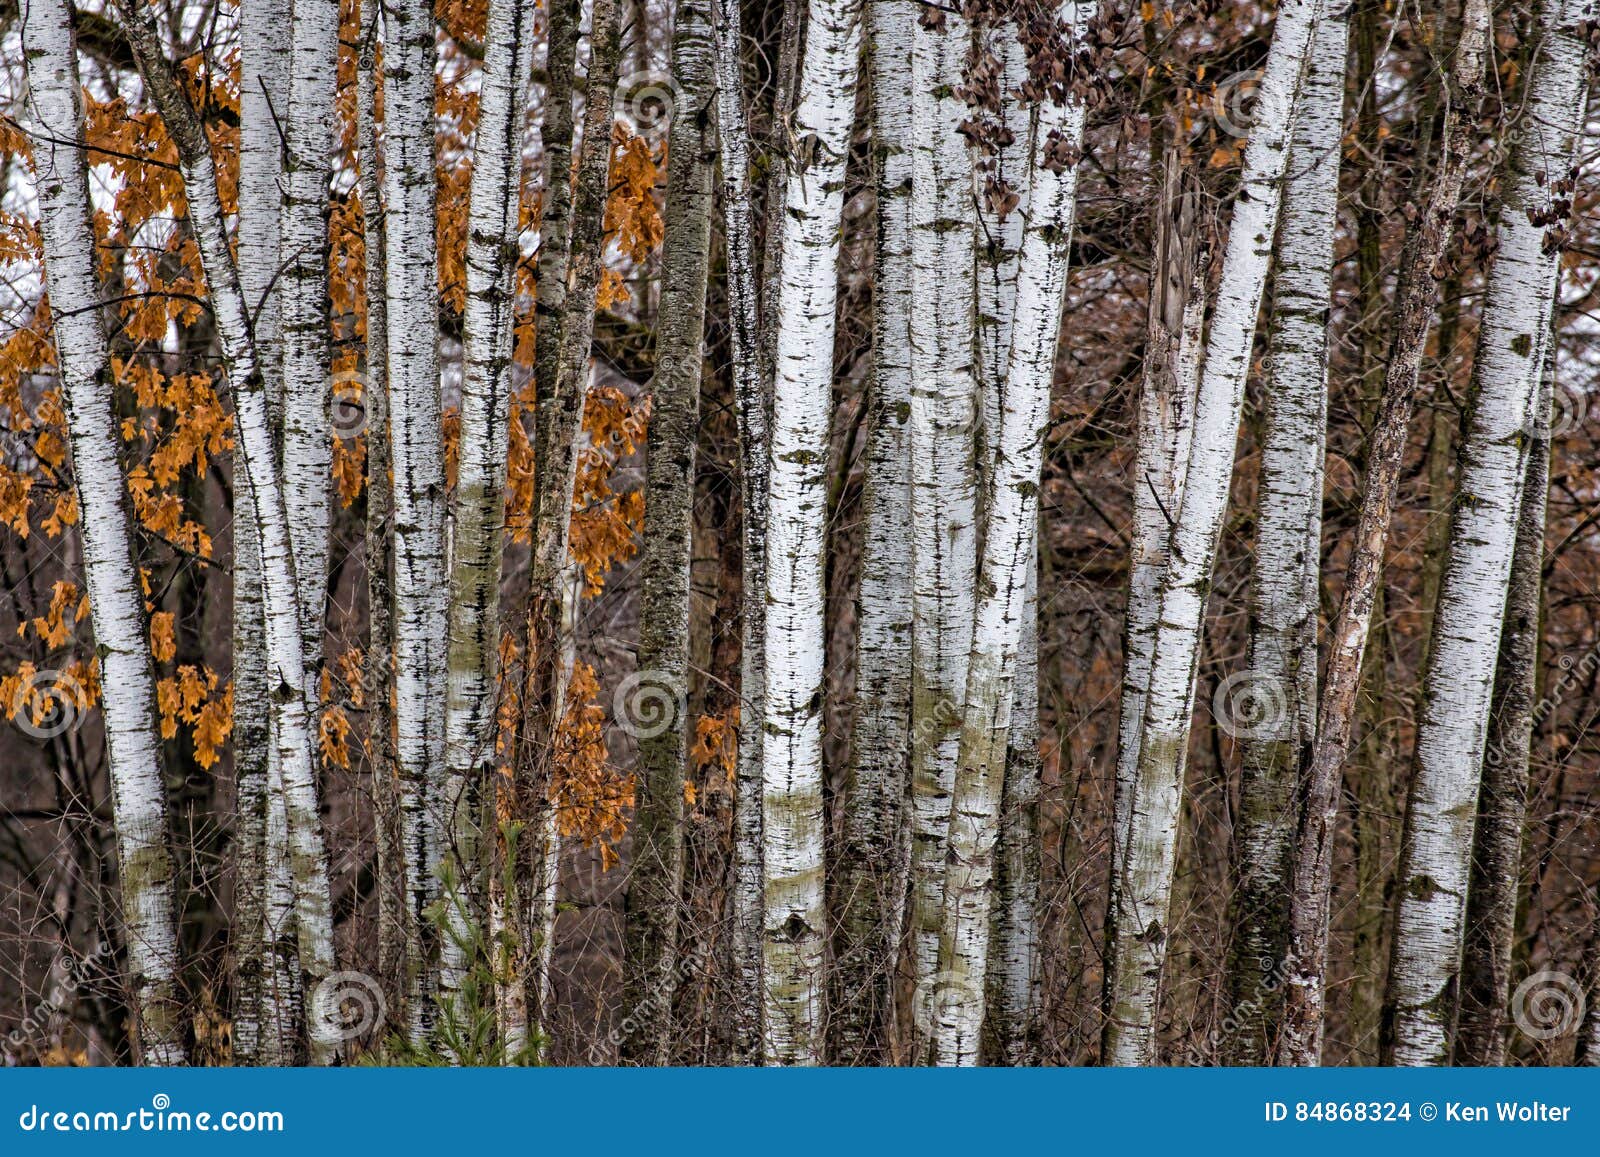 grouping of birch trees